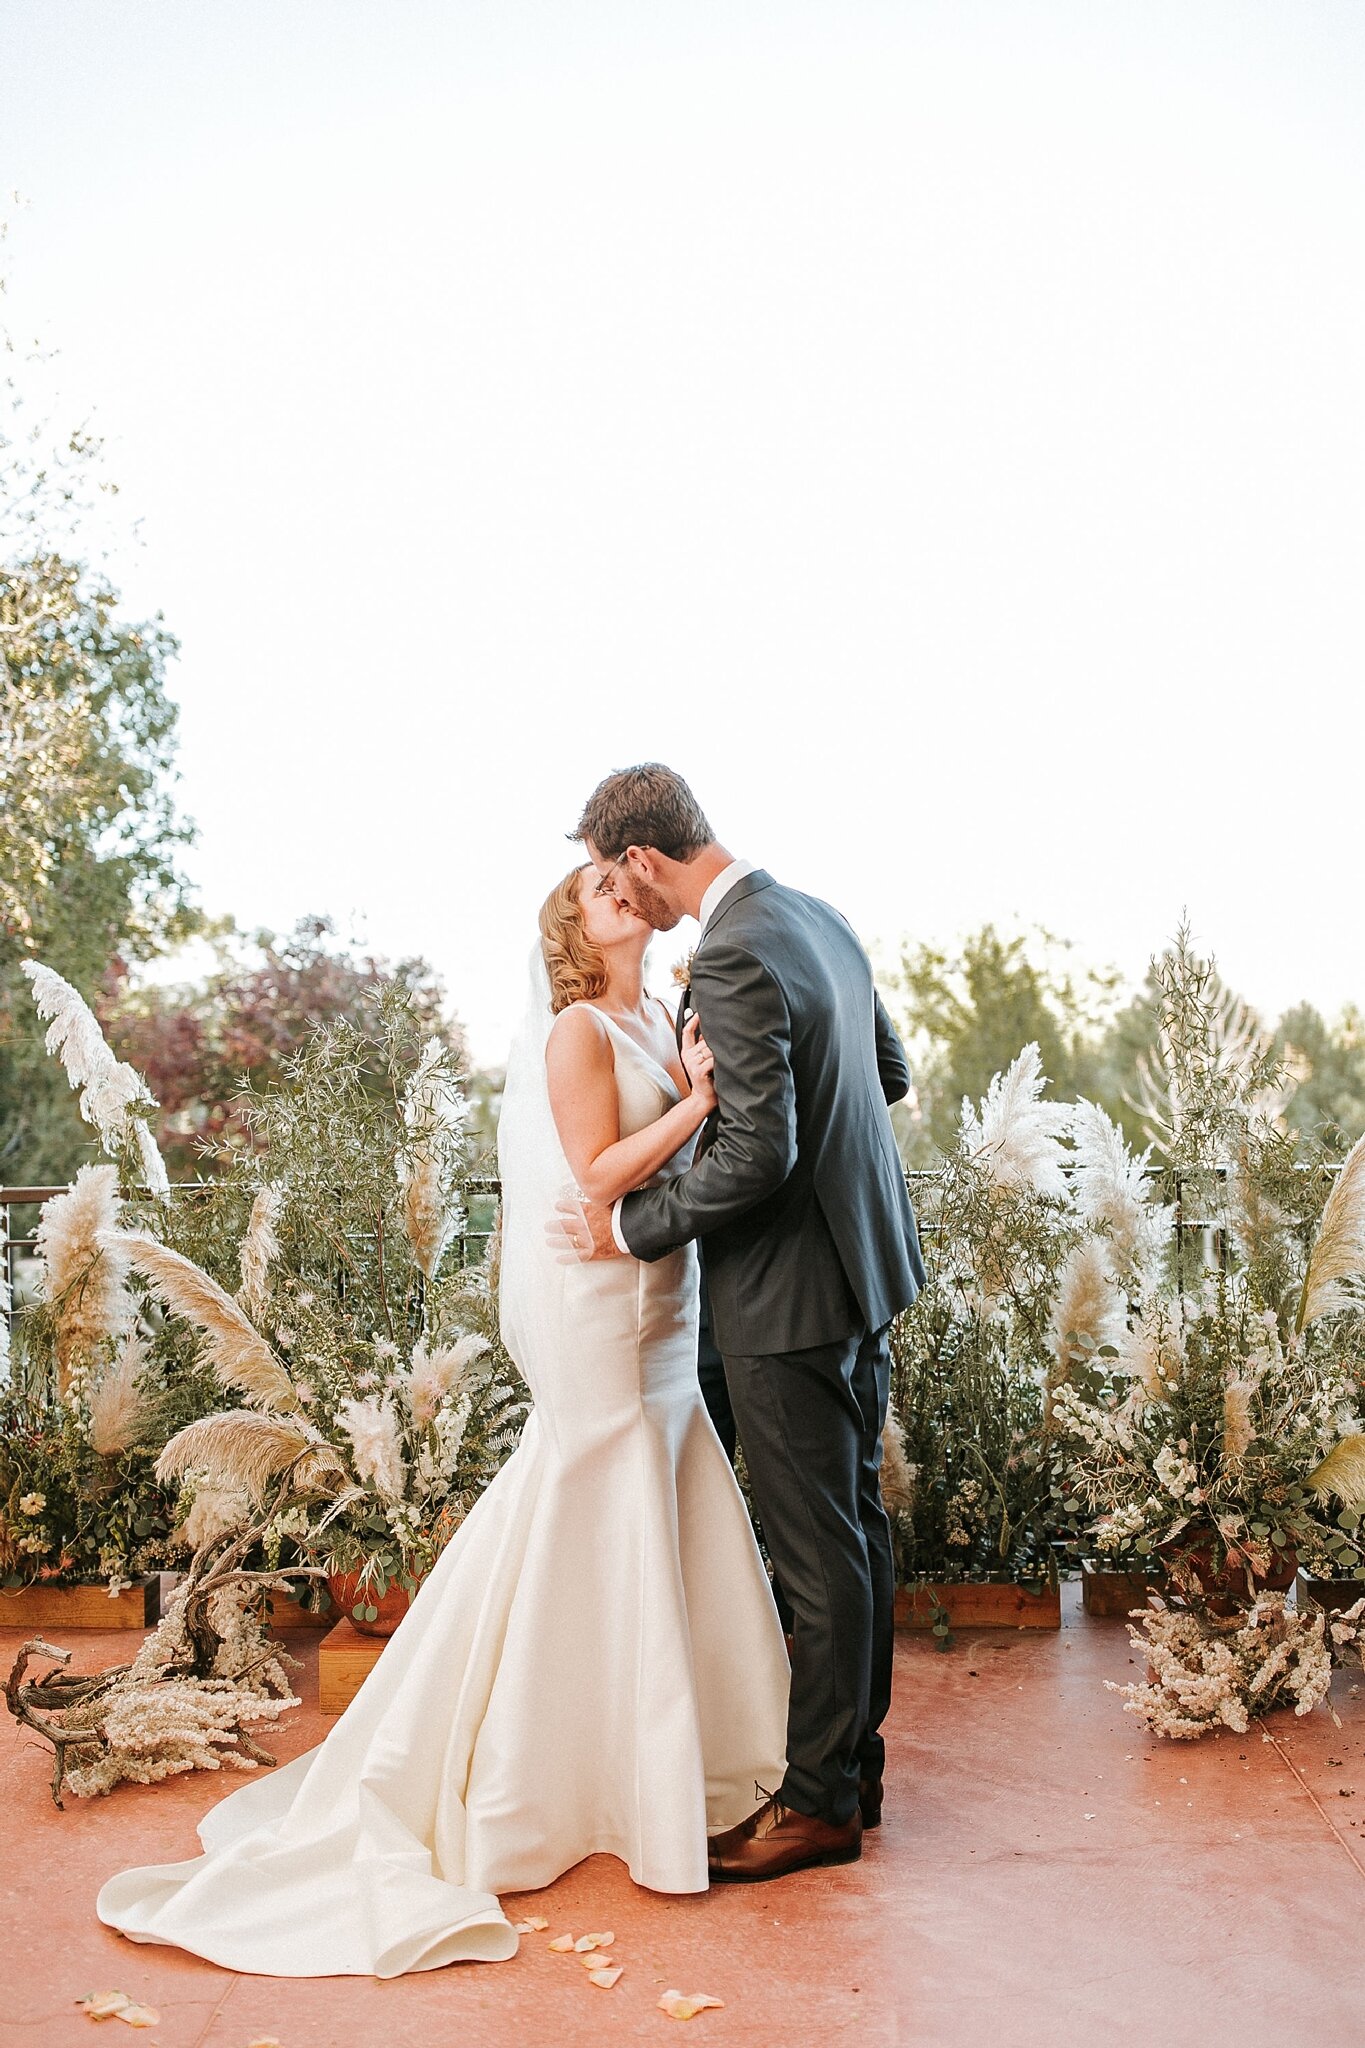 Alicia+lucia+photography+-+albuquerque+wedding+photographer+-+santa+fe+wedding+photography+-+new+mexico+wedding+photographer+-+new+mexico+wedding+-+wedding+gowns+-+trumpet+wedding+gown+-+bridal+gowns_0014.jpg